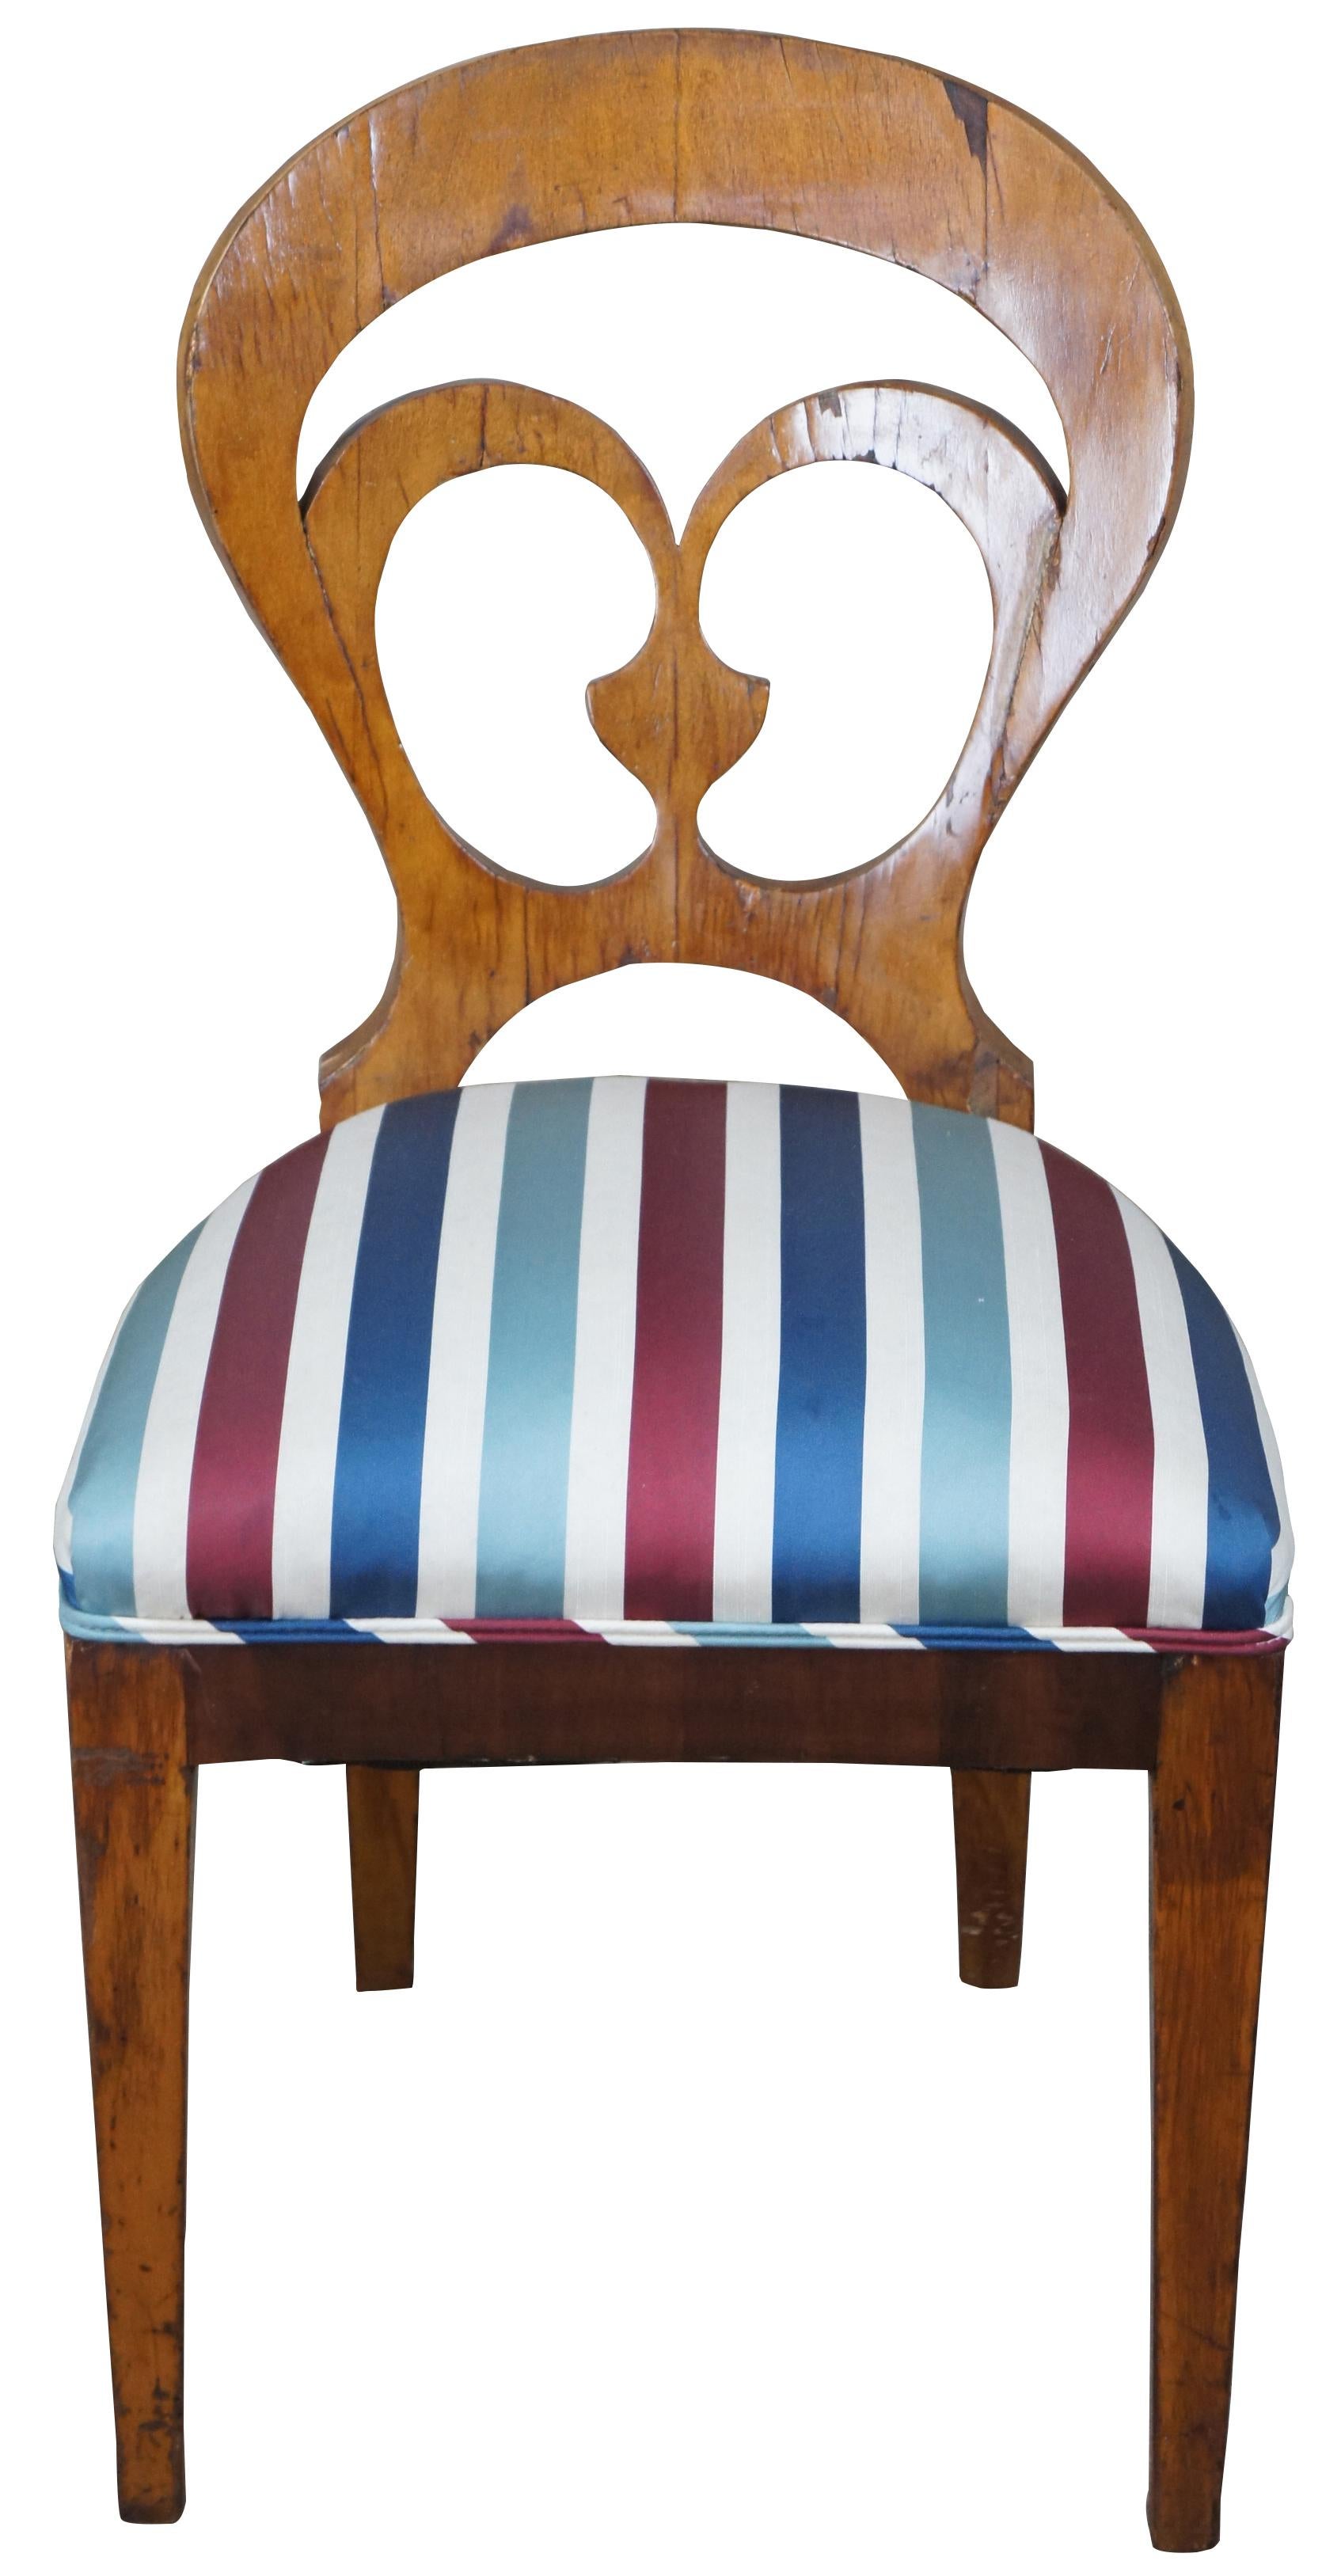 Early 19th century Biedermeier side chair. Features a balloon shaped back with pierced design over striped seat and square tapered legs.
 